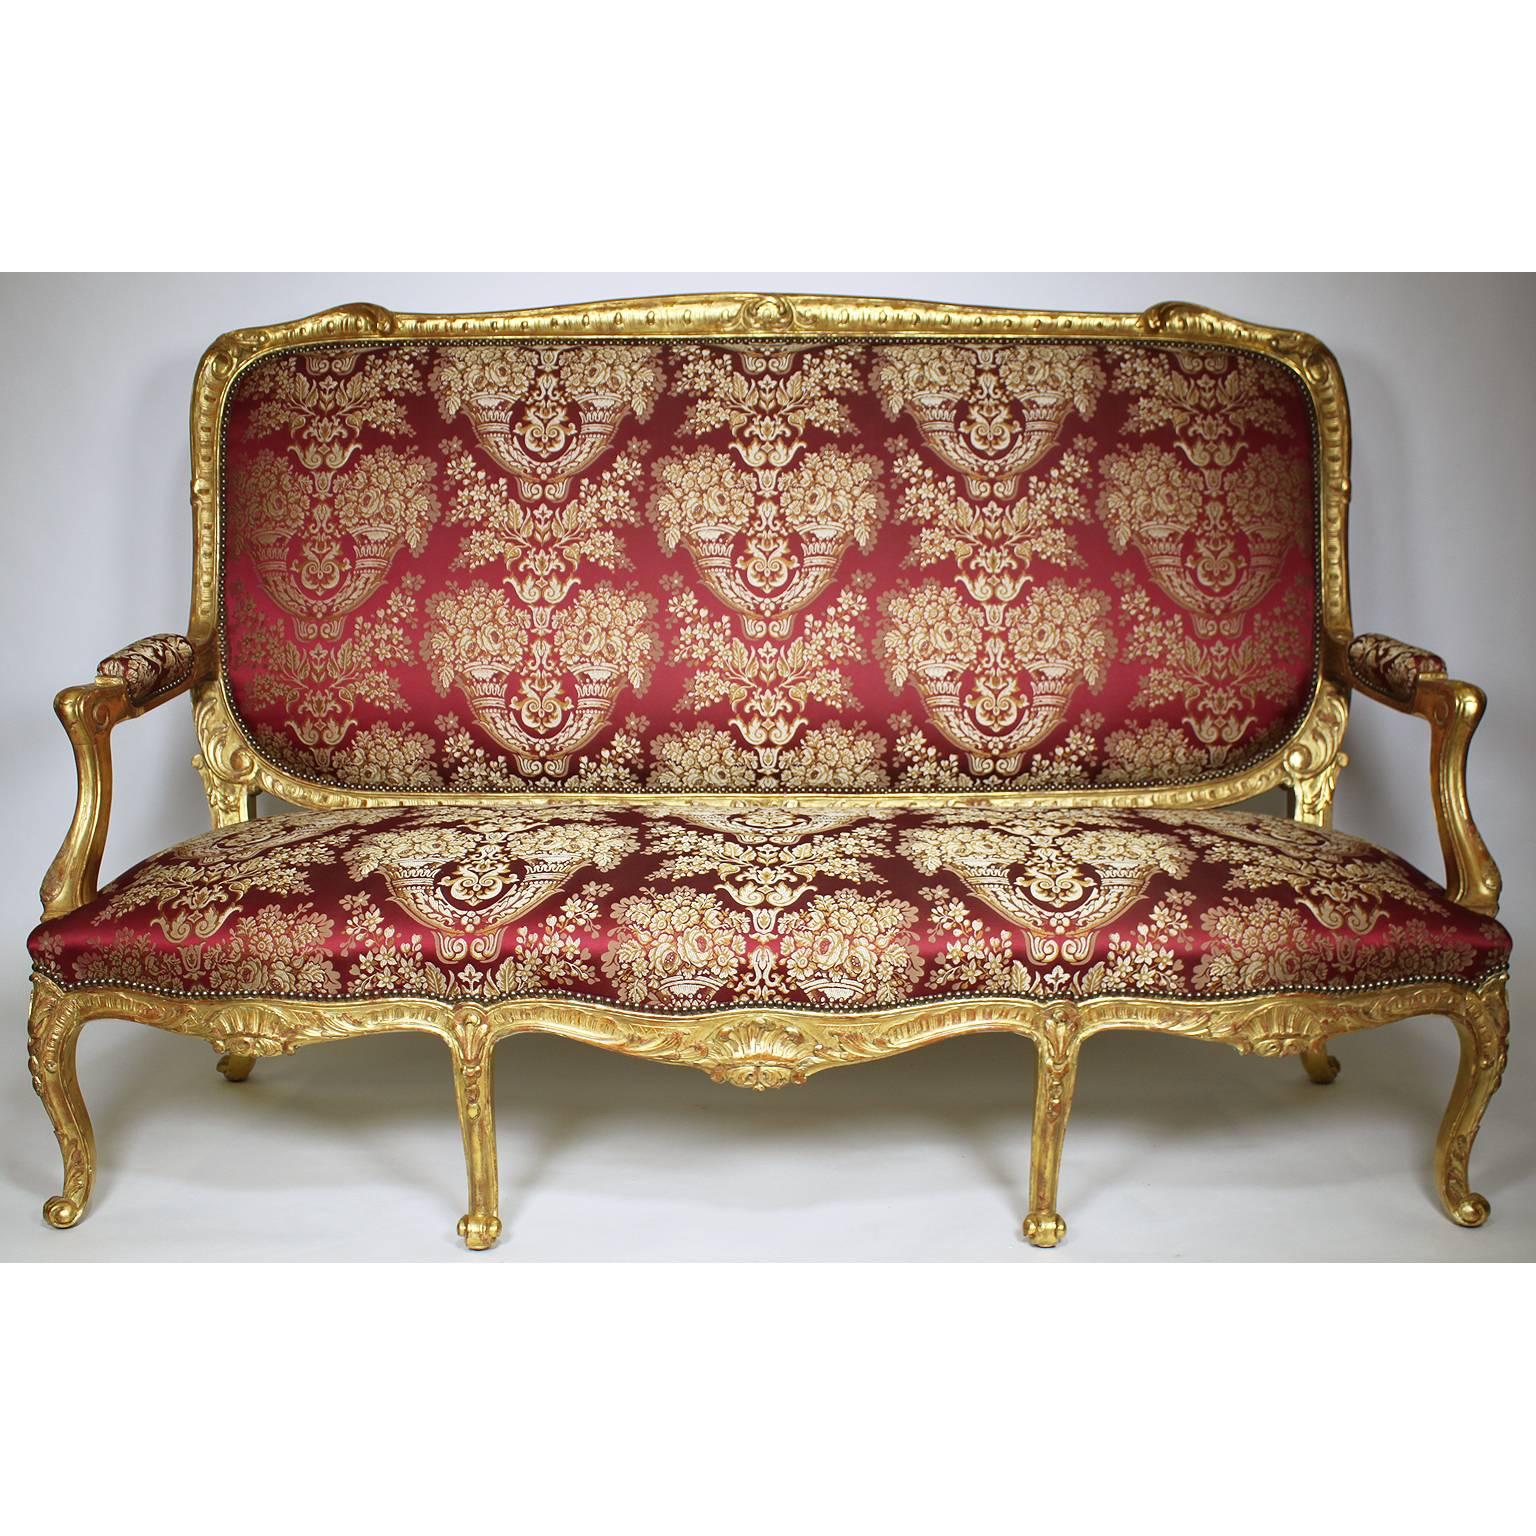 A very fine and palatial French 19th century Louis XV style giltwood carved five-piece salon suite, comprising of a canapé (Settee) and four fauteuils à la reine (Armchairs), all of grand size, high backs and recently re-upholstered, Paris, circa